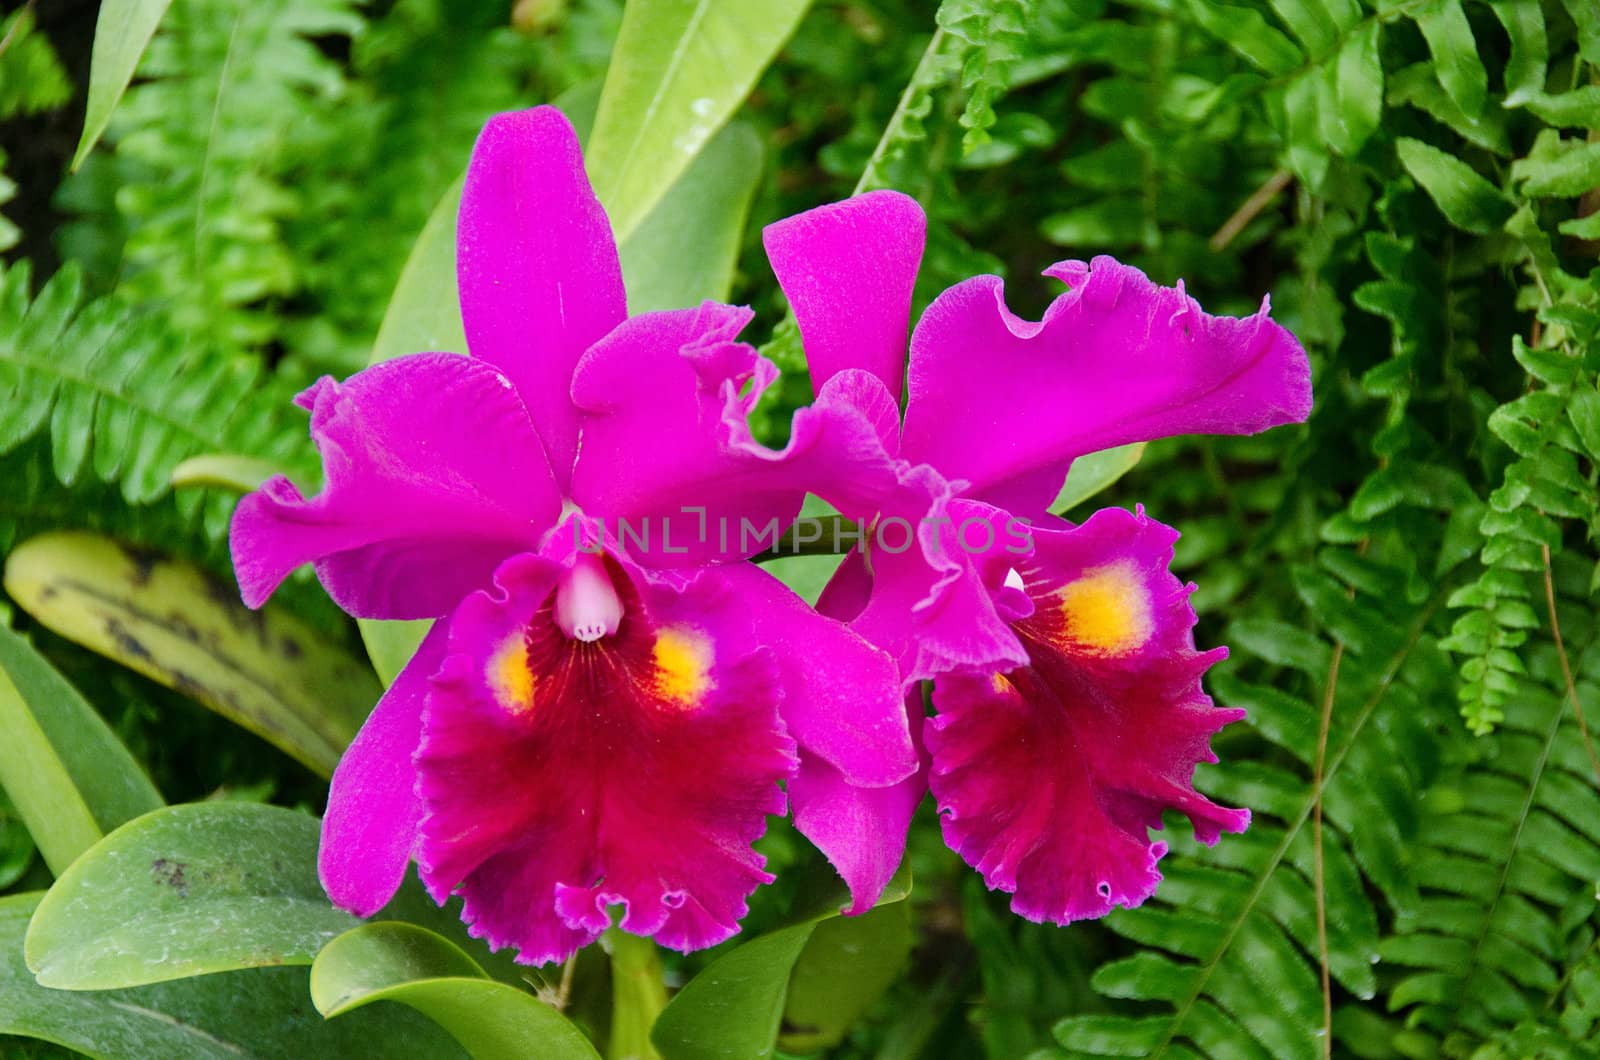 Purple orchid flowers in front of a green leafy background